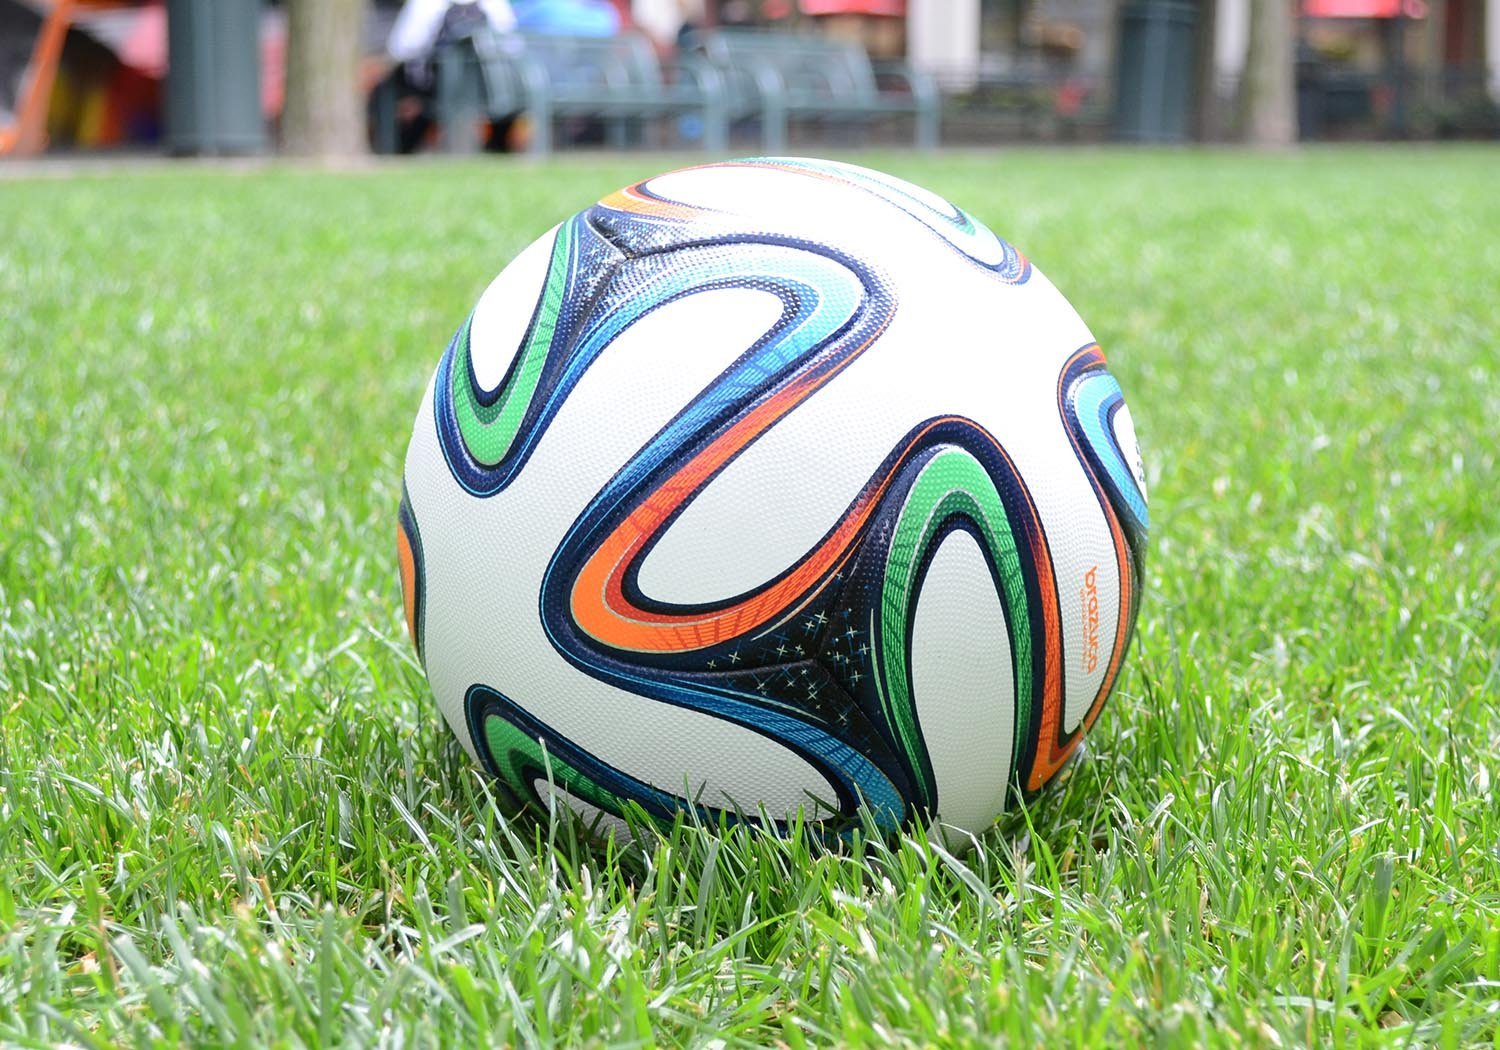 Figure 2: Created by Adidas for the 2014 World Cup in Brazil, the Brazuca soccer ball uses syntactic foam technology. (Source: Dr. Nikhil Gupta, NYU Tandon School of Engineering)